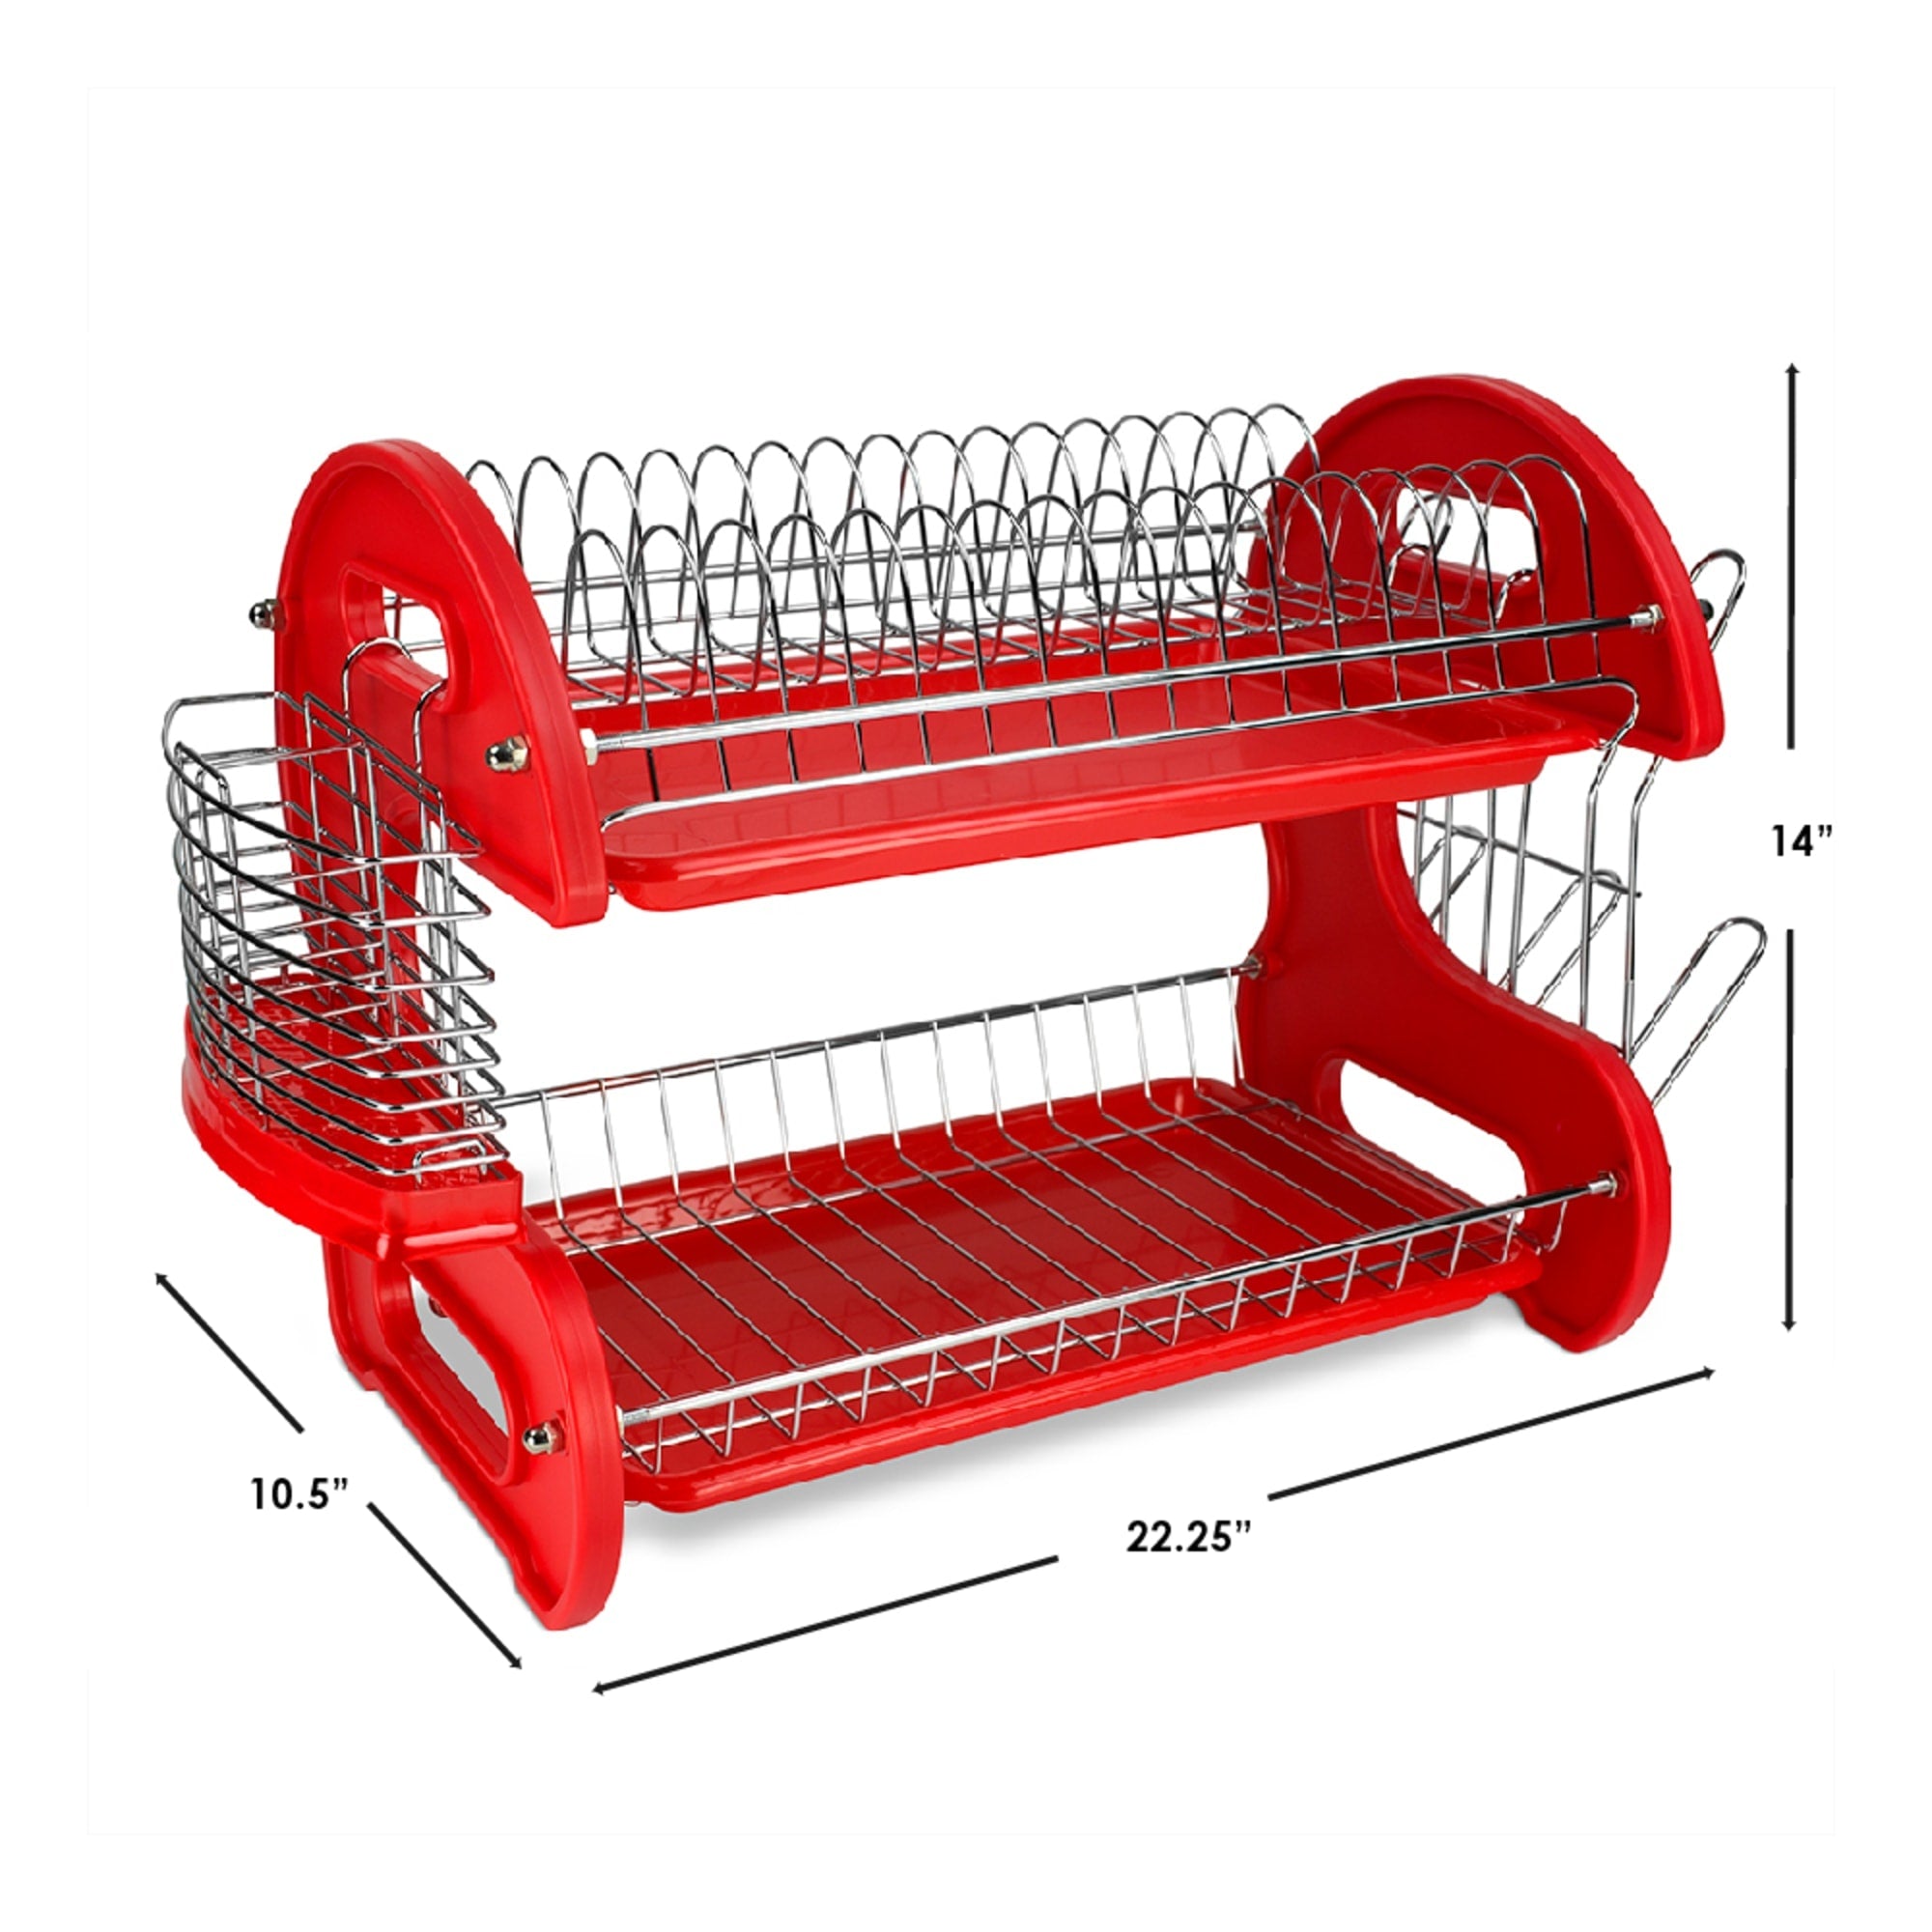 Home Basics 2-Tier Plastic Dish Drainer $20.00 EACH, CASE PACK OF 6